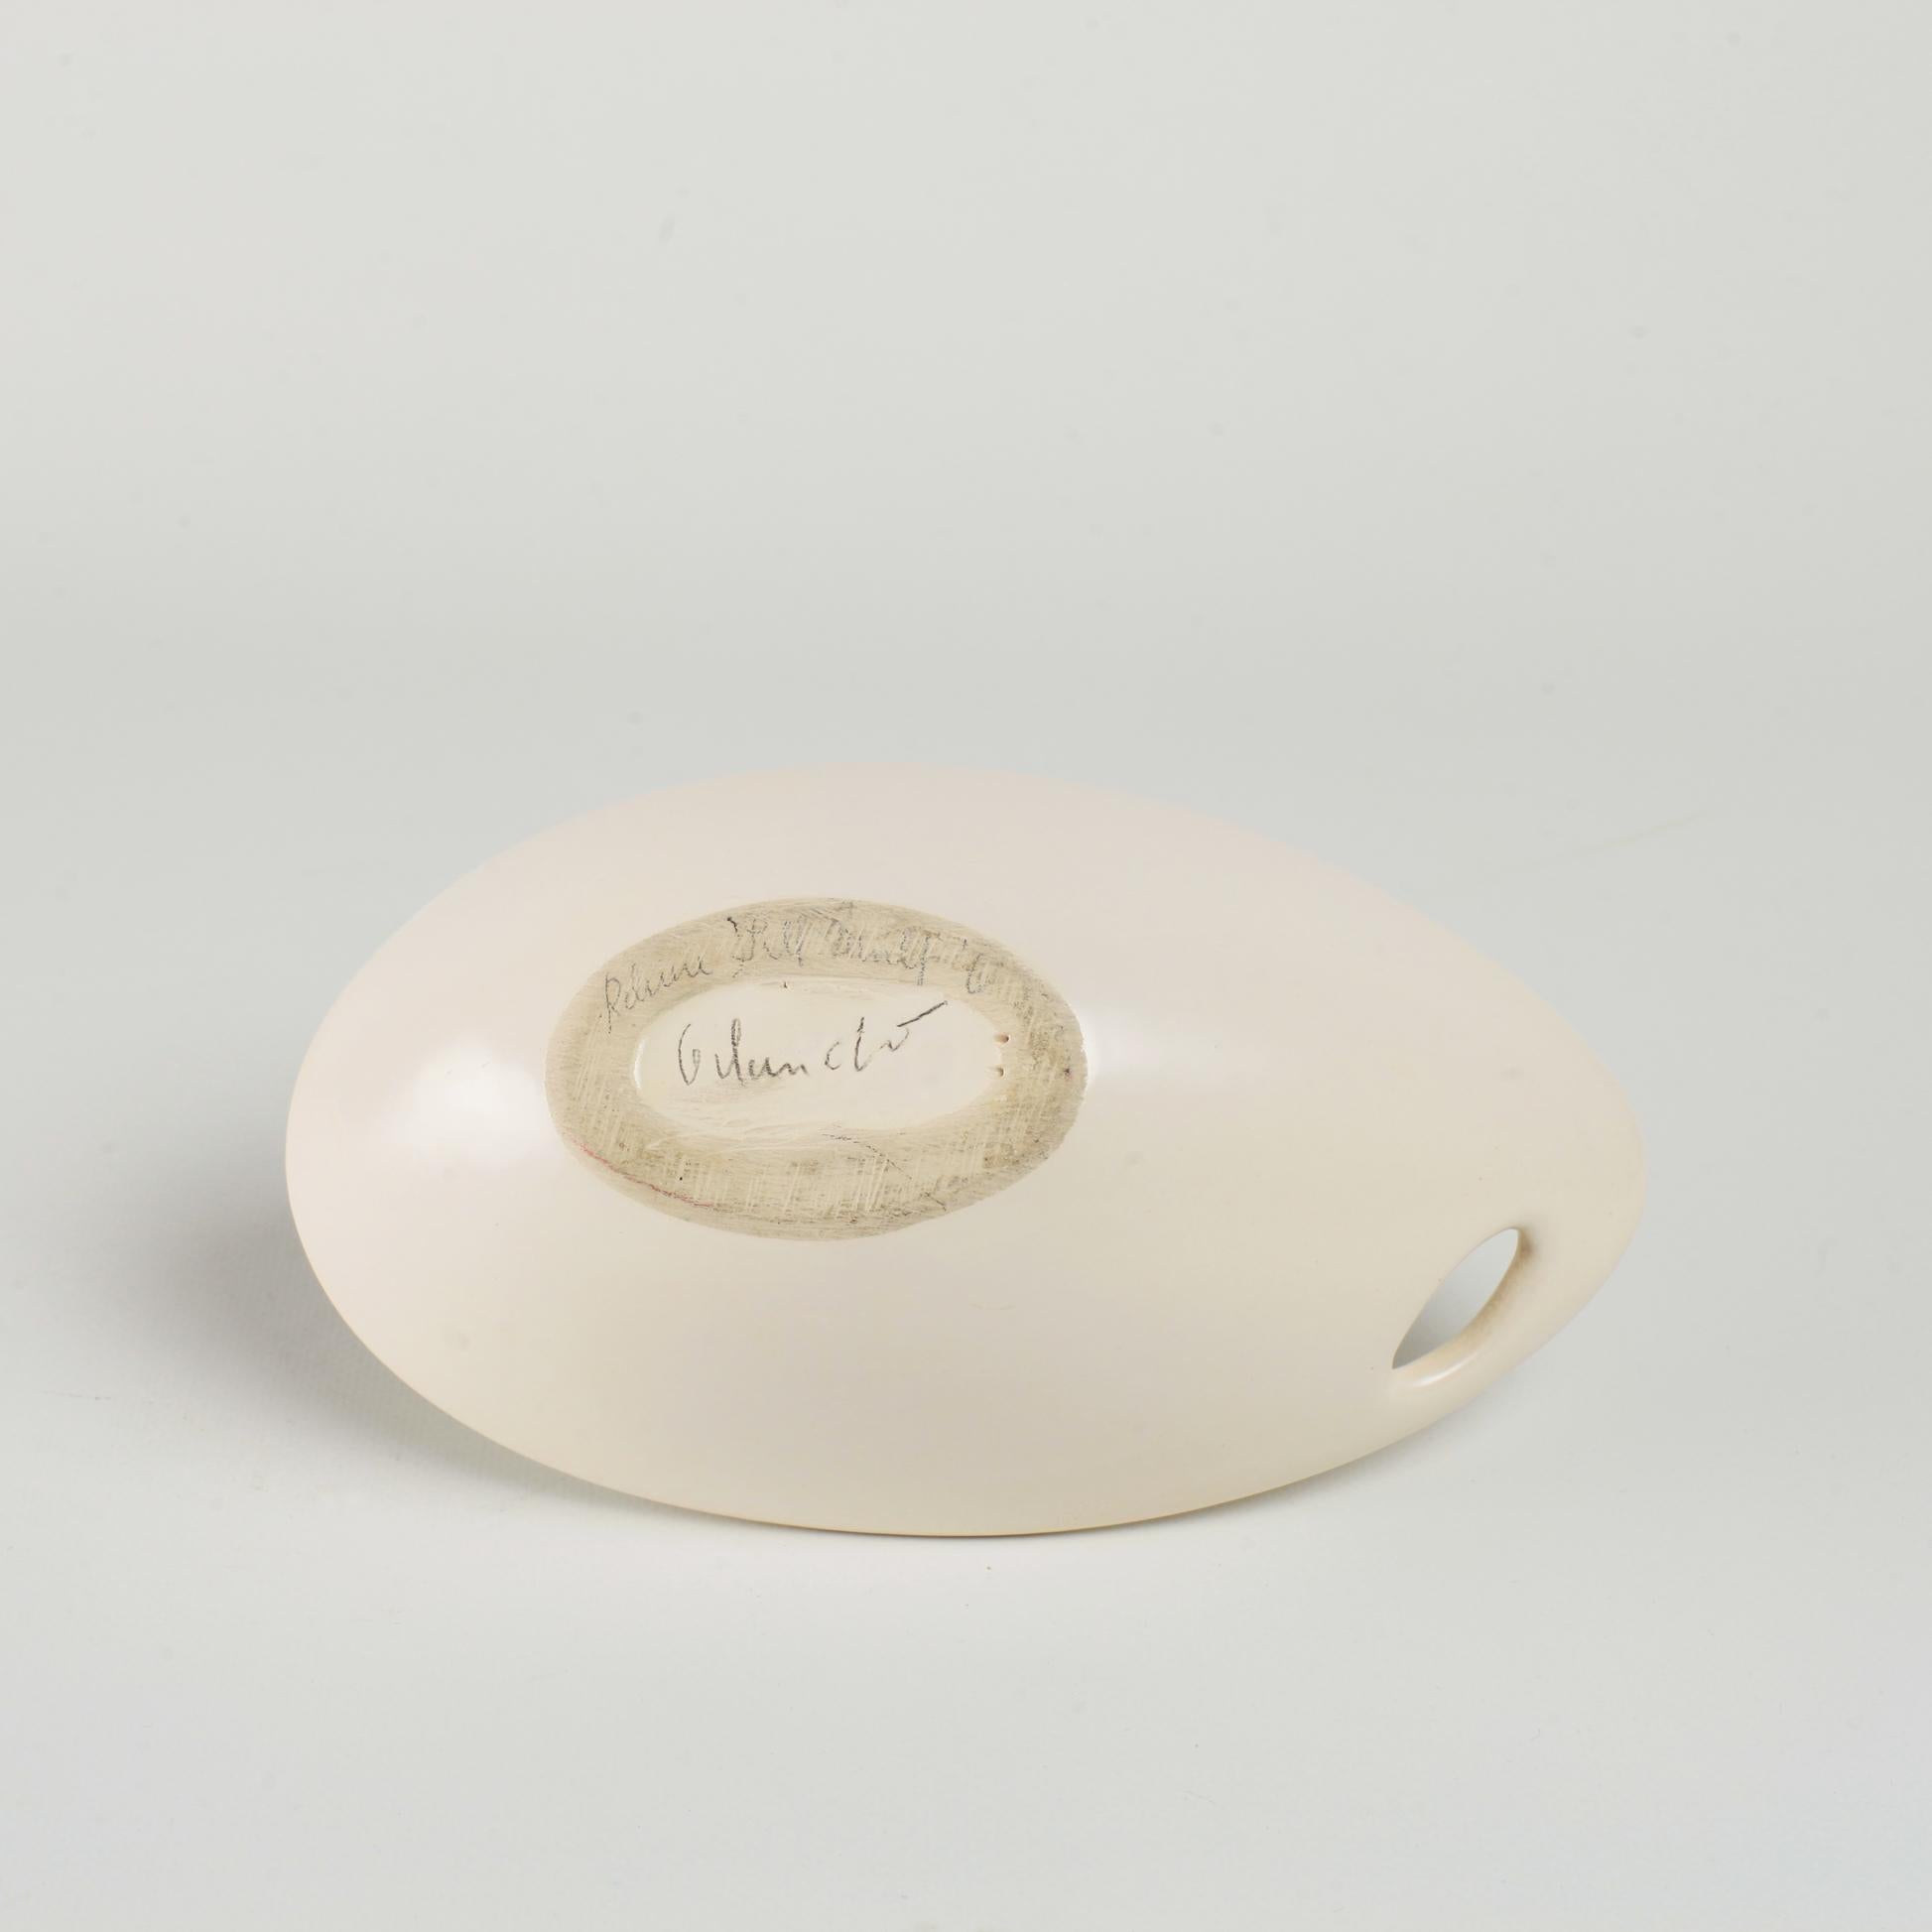 Mid-20th Century Ceramic Coupe by Peter and Denise Orlando, France, circa 1950